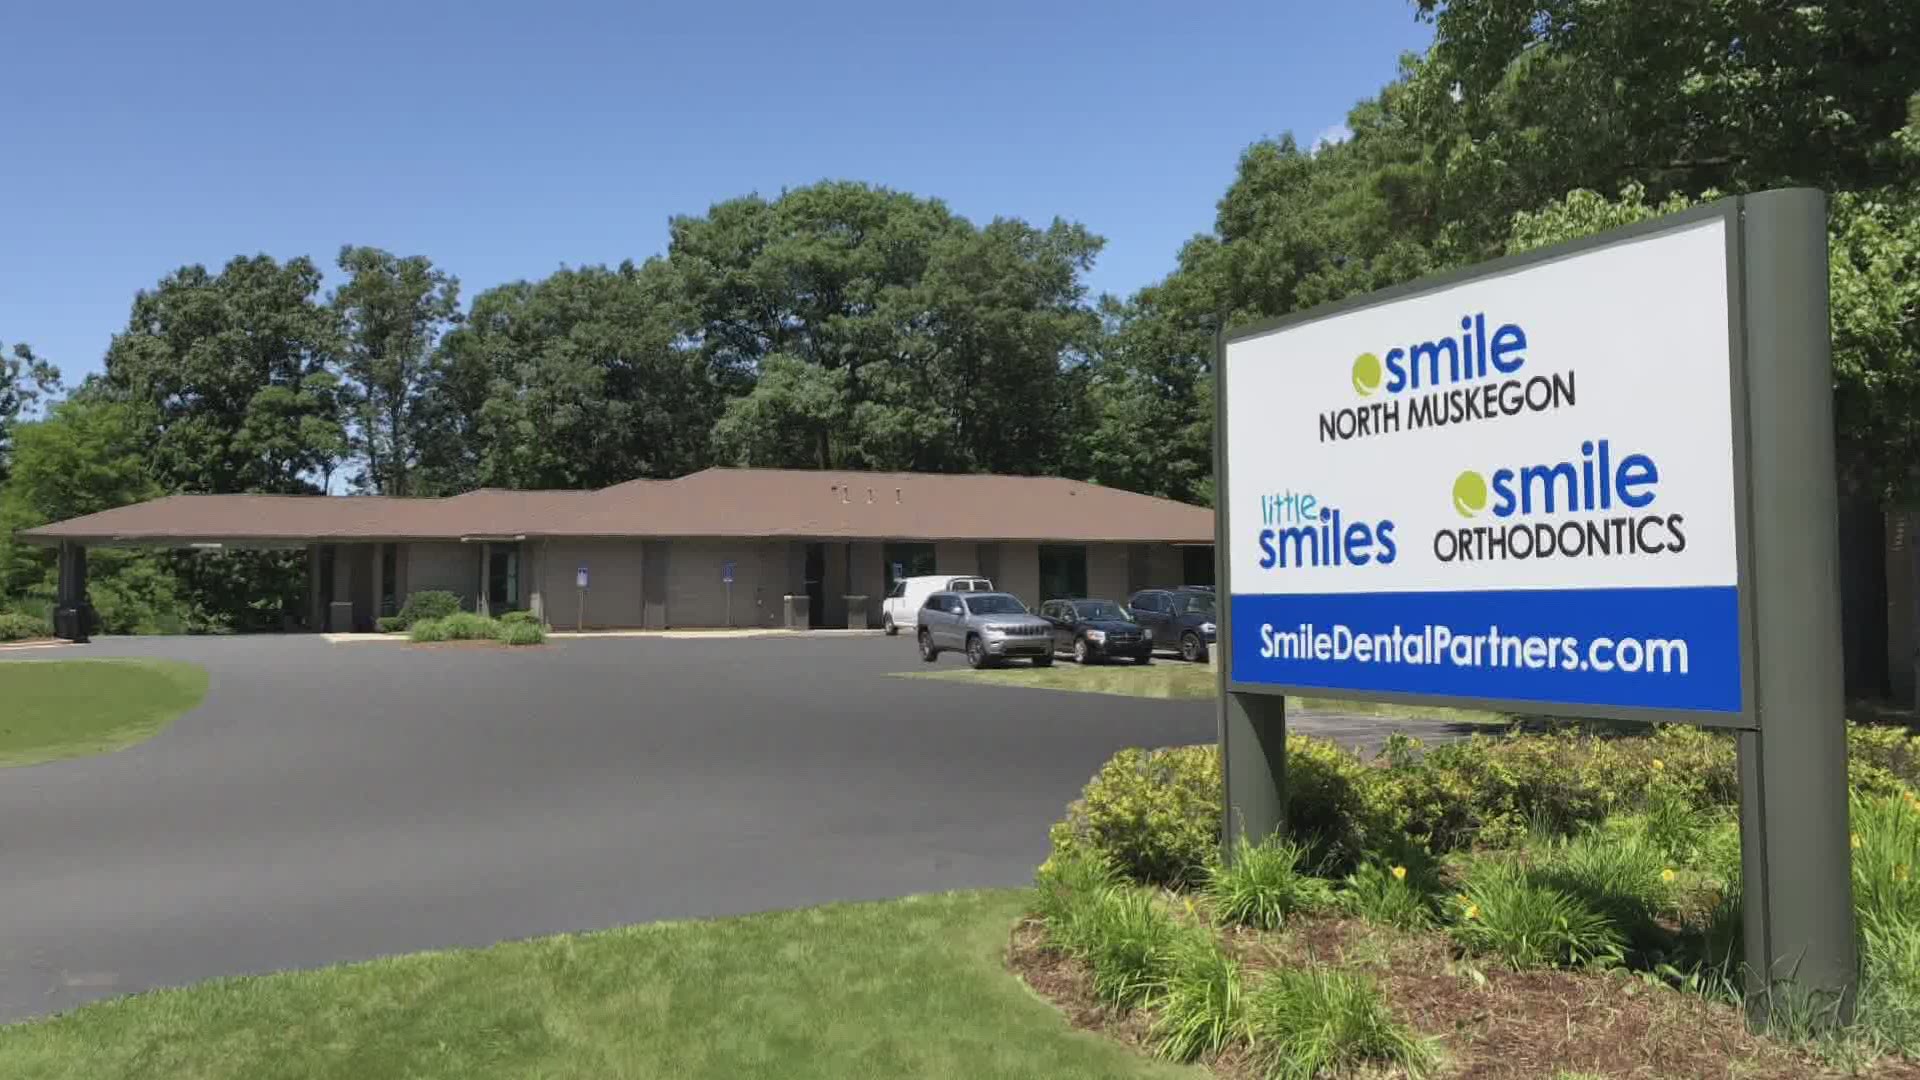 Smile Dental Partners goes the extra mile to ensure patient safety.